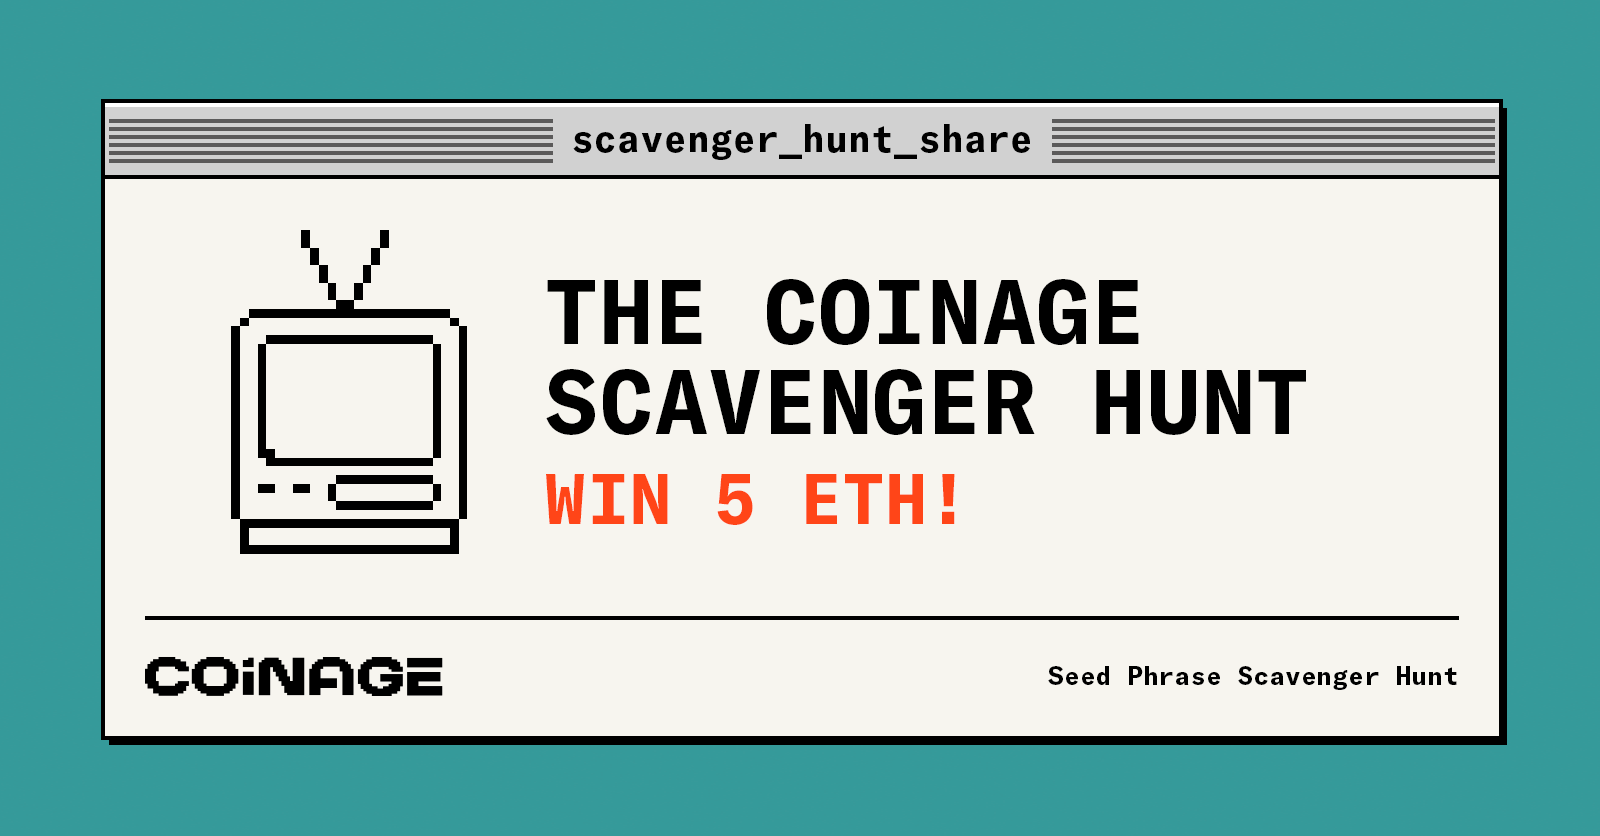 Coinage is giving away 5 ETH through an Onchain Scavenger Hunt. 12 Days. 12 Clues. 12 words to unlock a simulated seed phrase. 